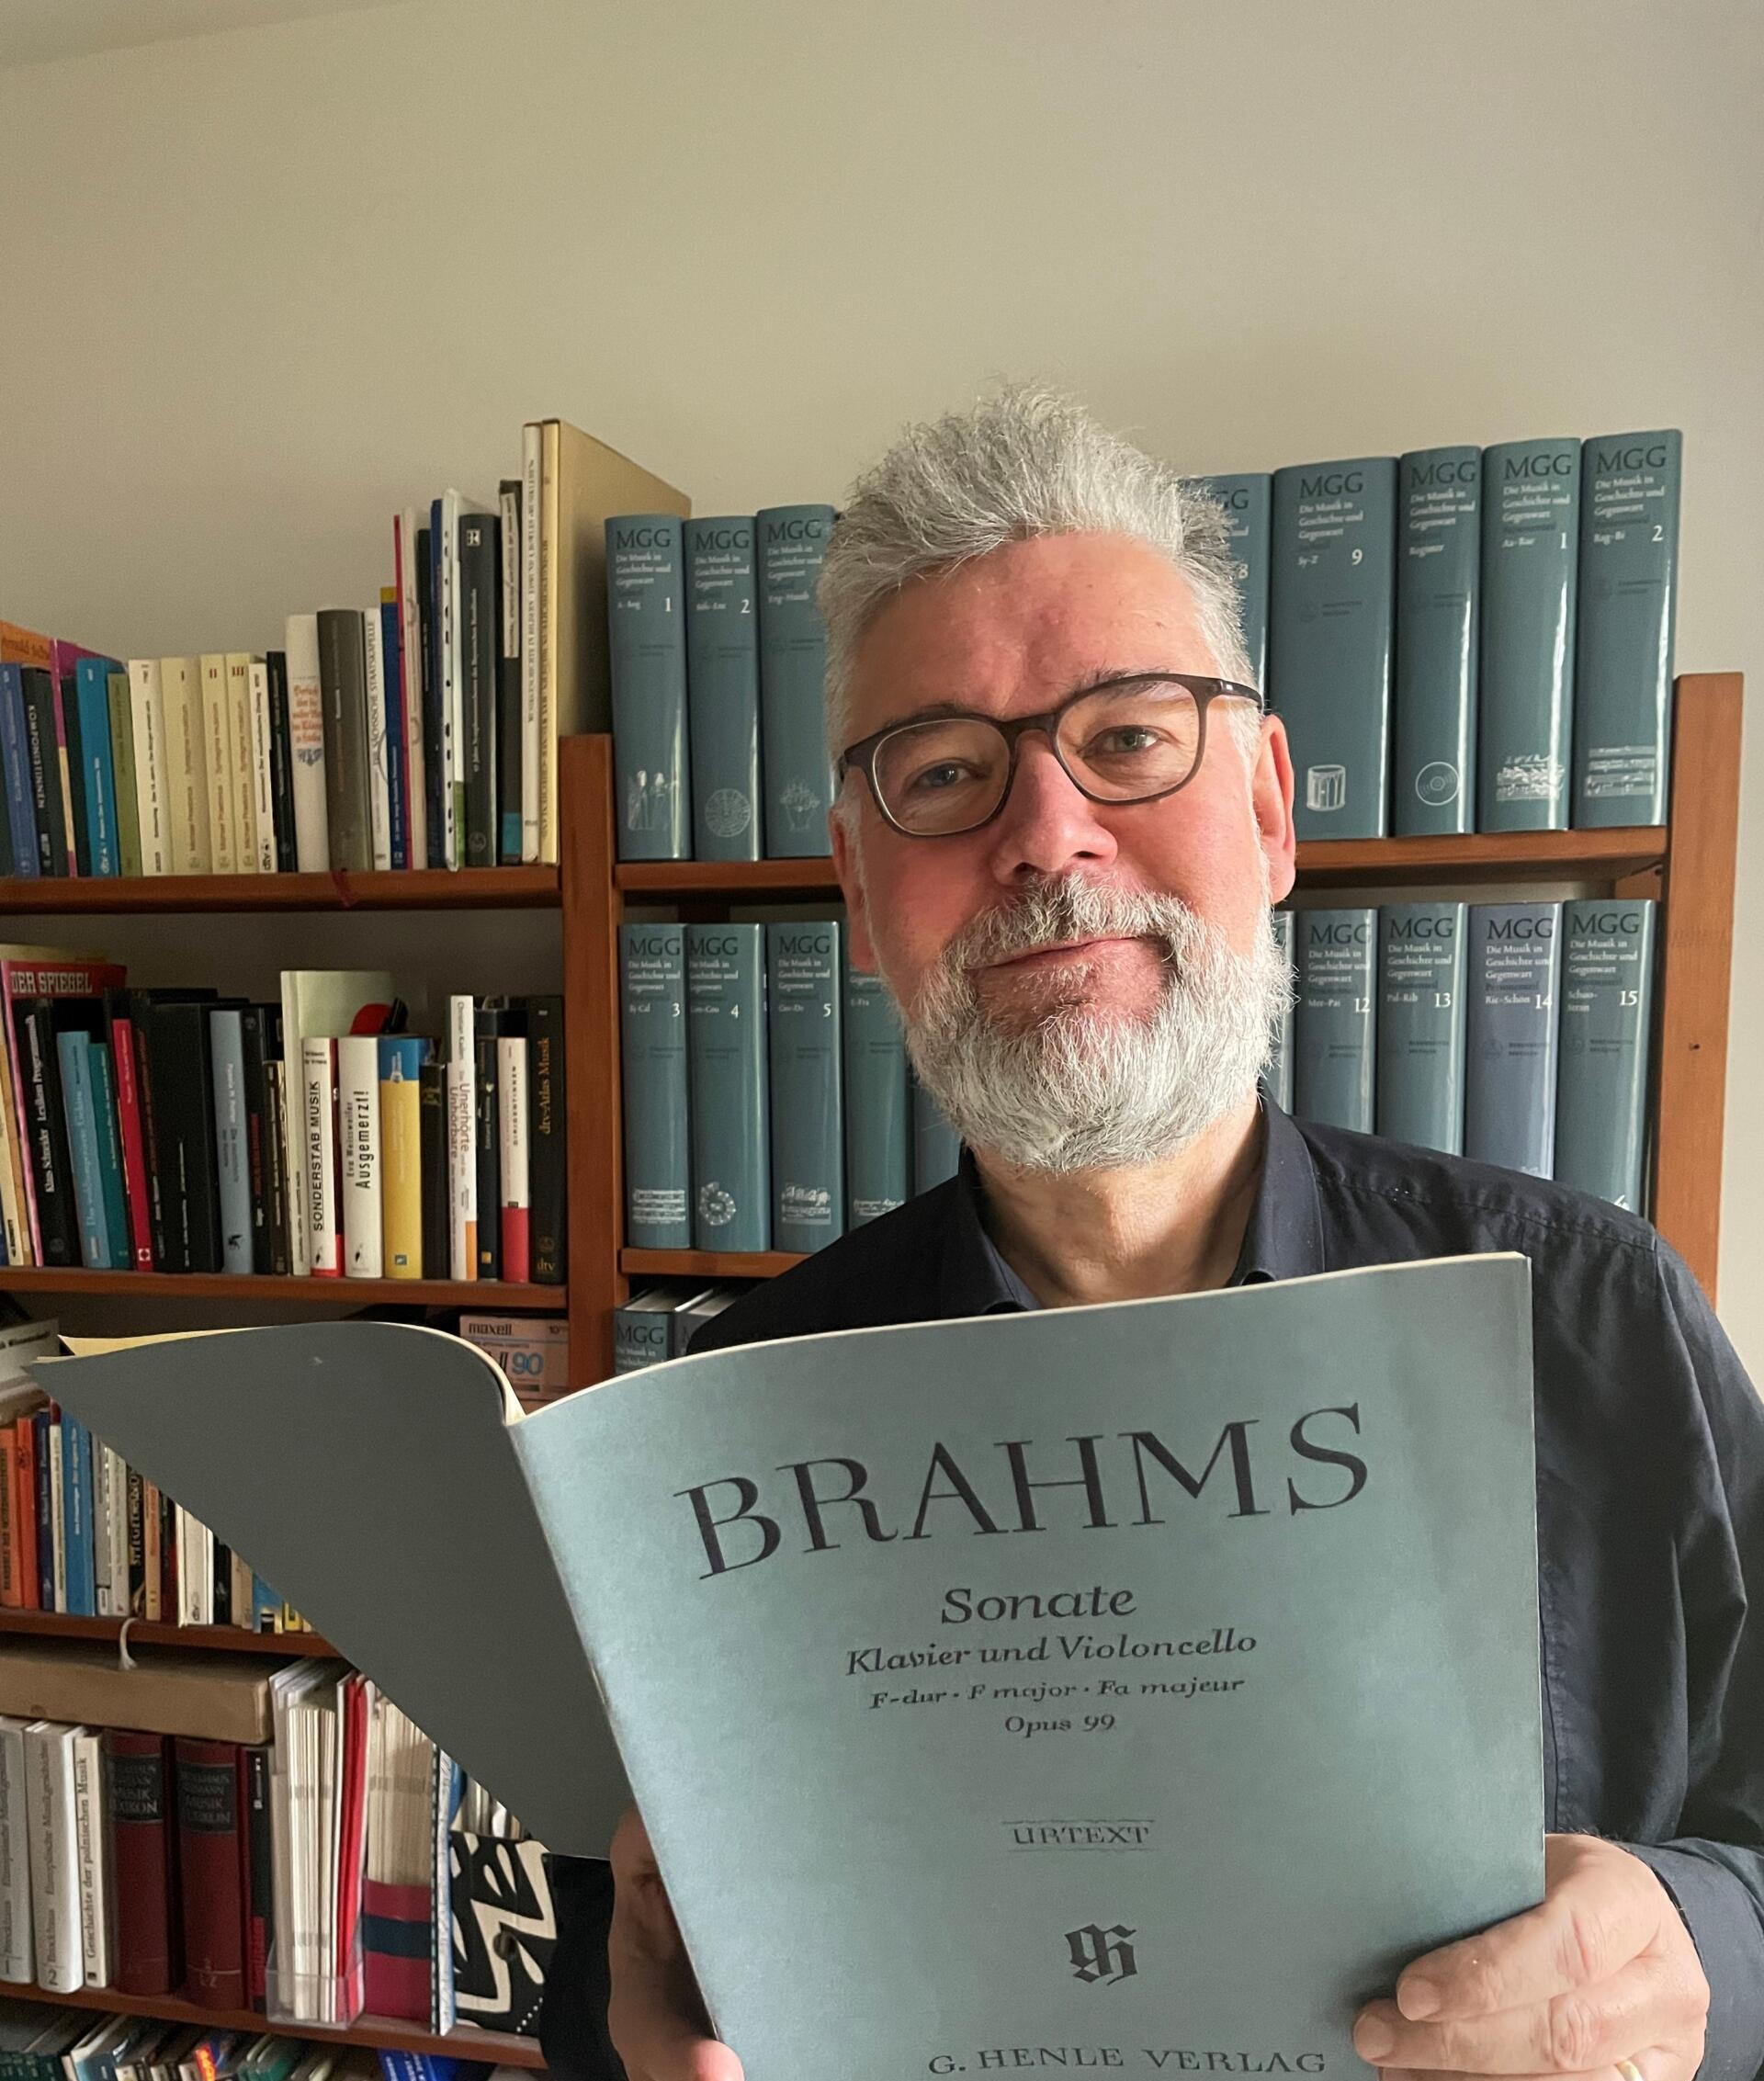 Tim Koeritz stands in front of a wall of books and holds a Brahms score in his hand.